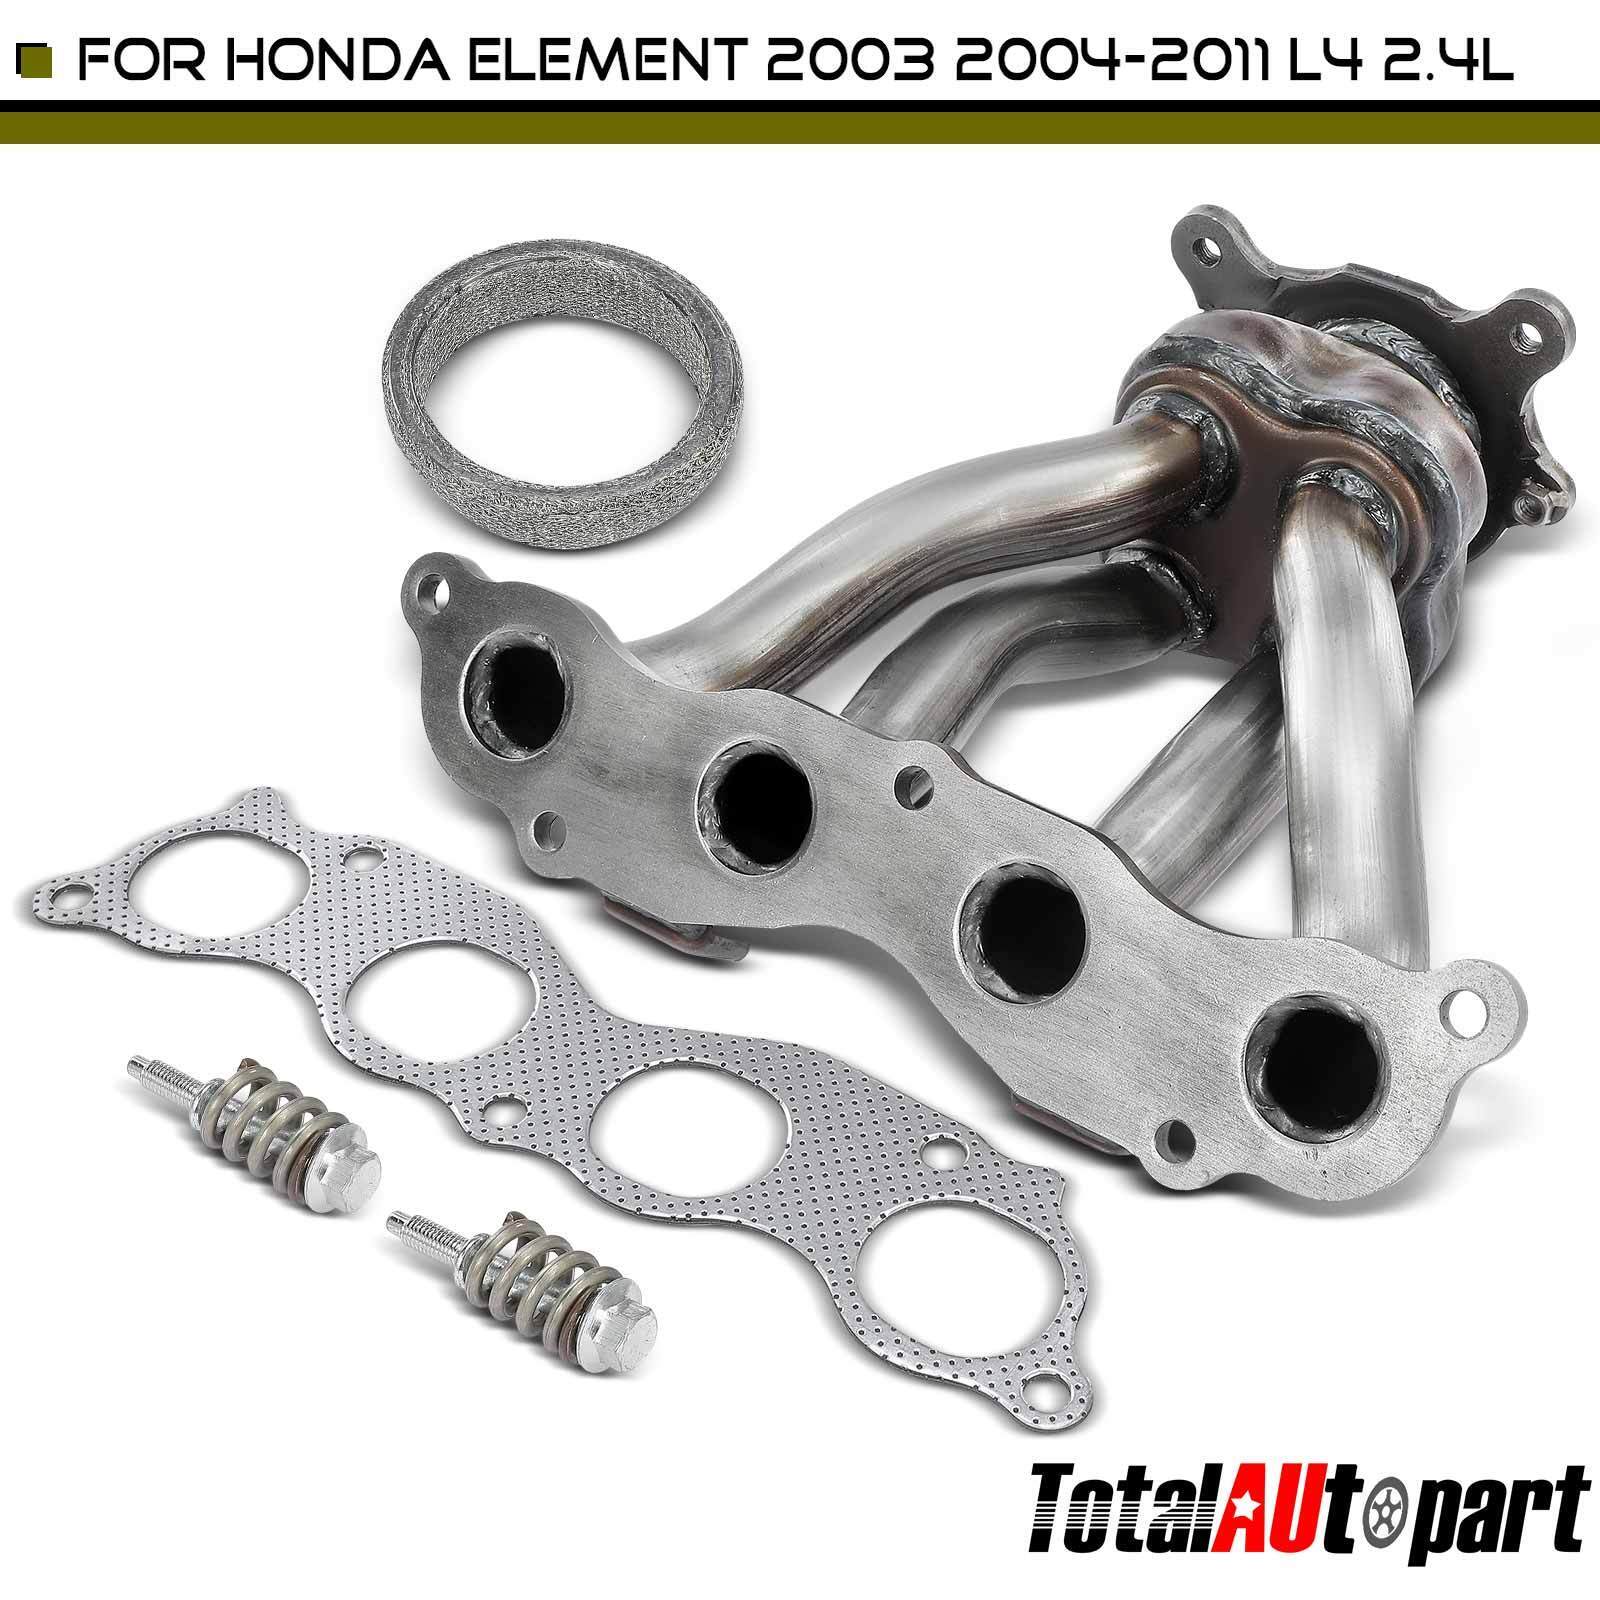 Exhaust Manifold with Gasket Kit for Honda Element 2003-2011 L4 2.4L 18100PZDA00